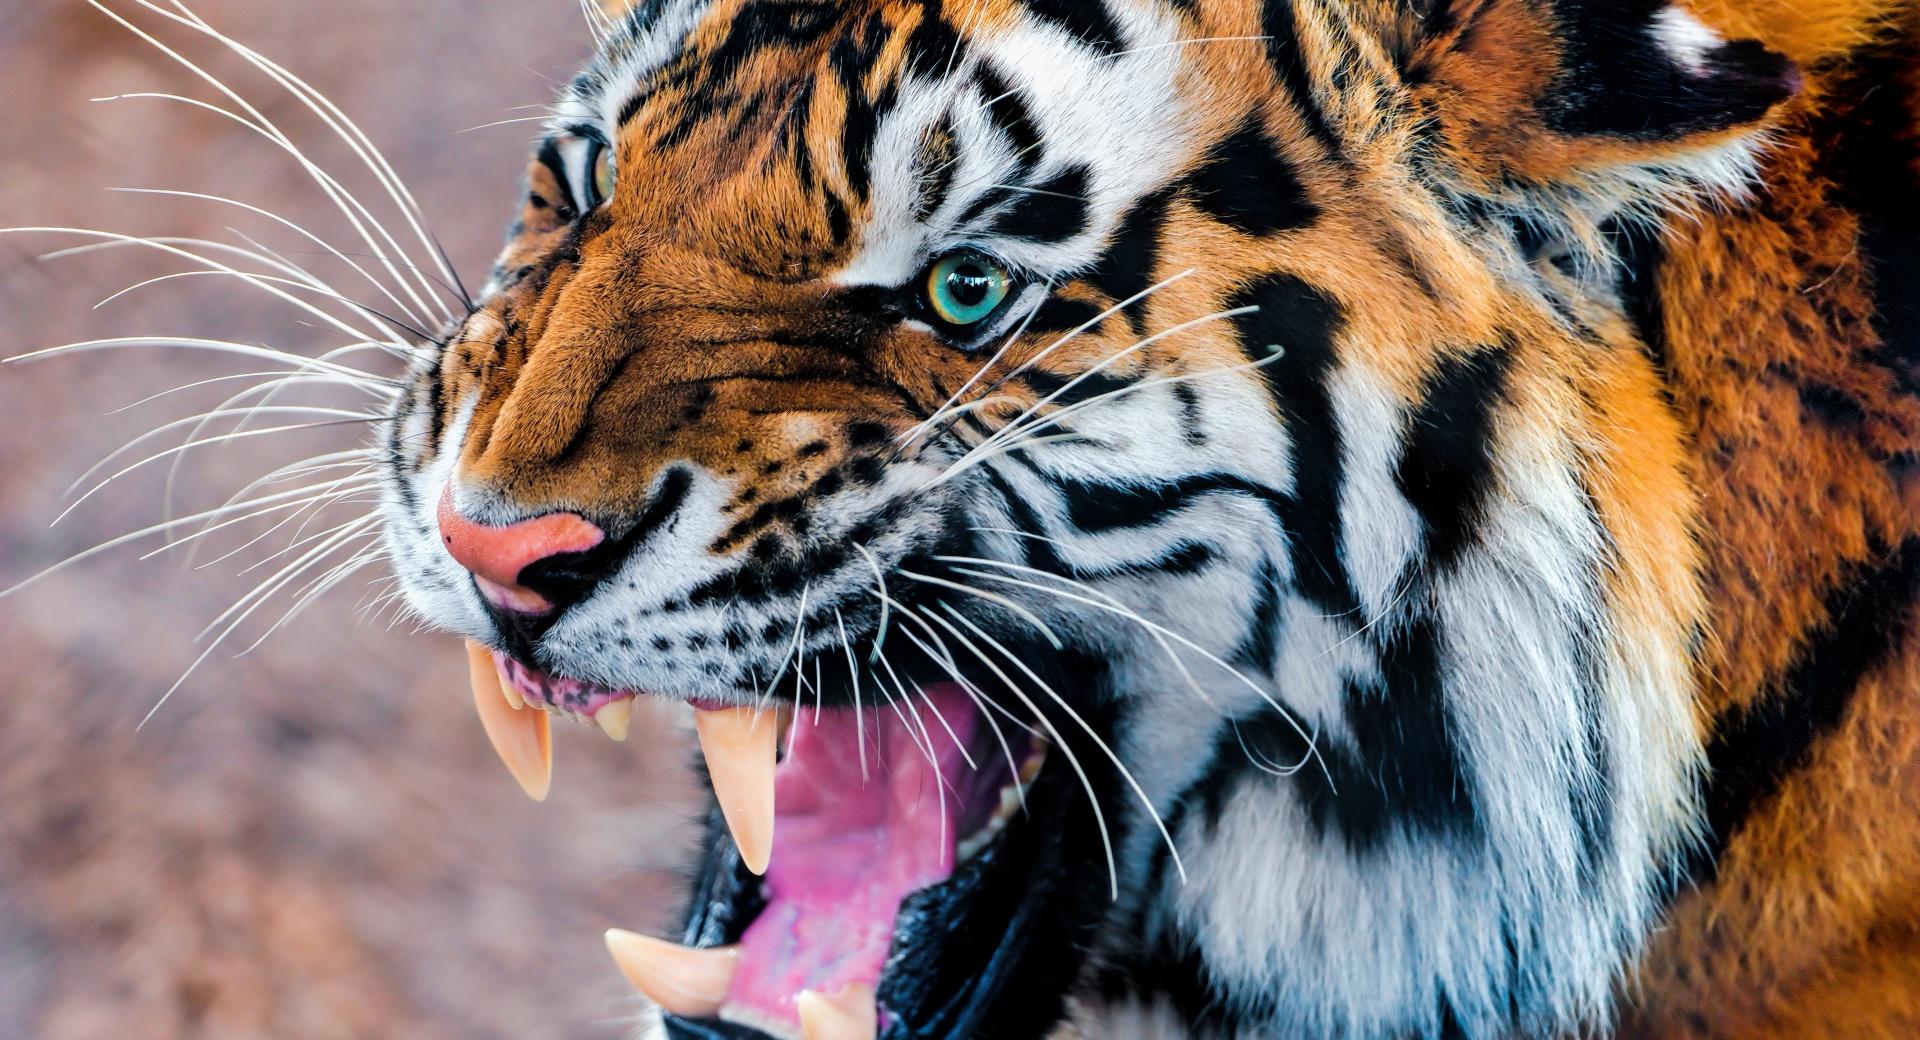 Snarling Tiger wallpapers HD quality